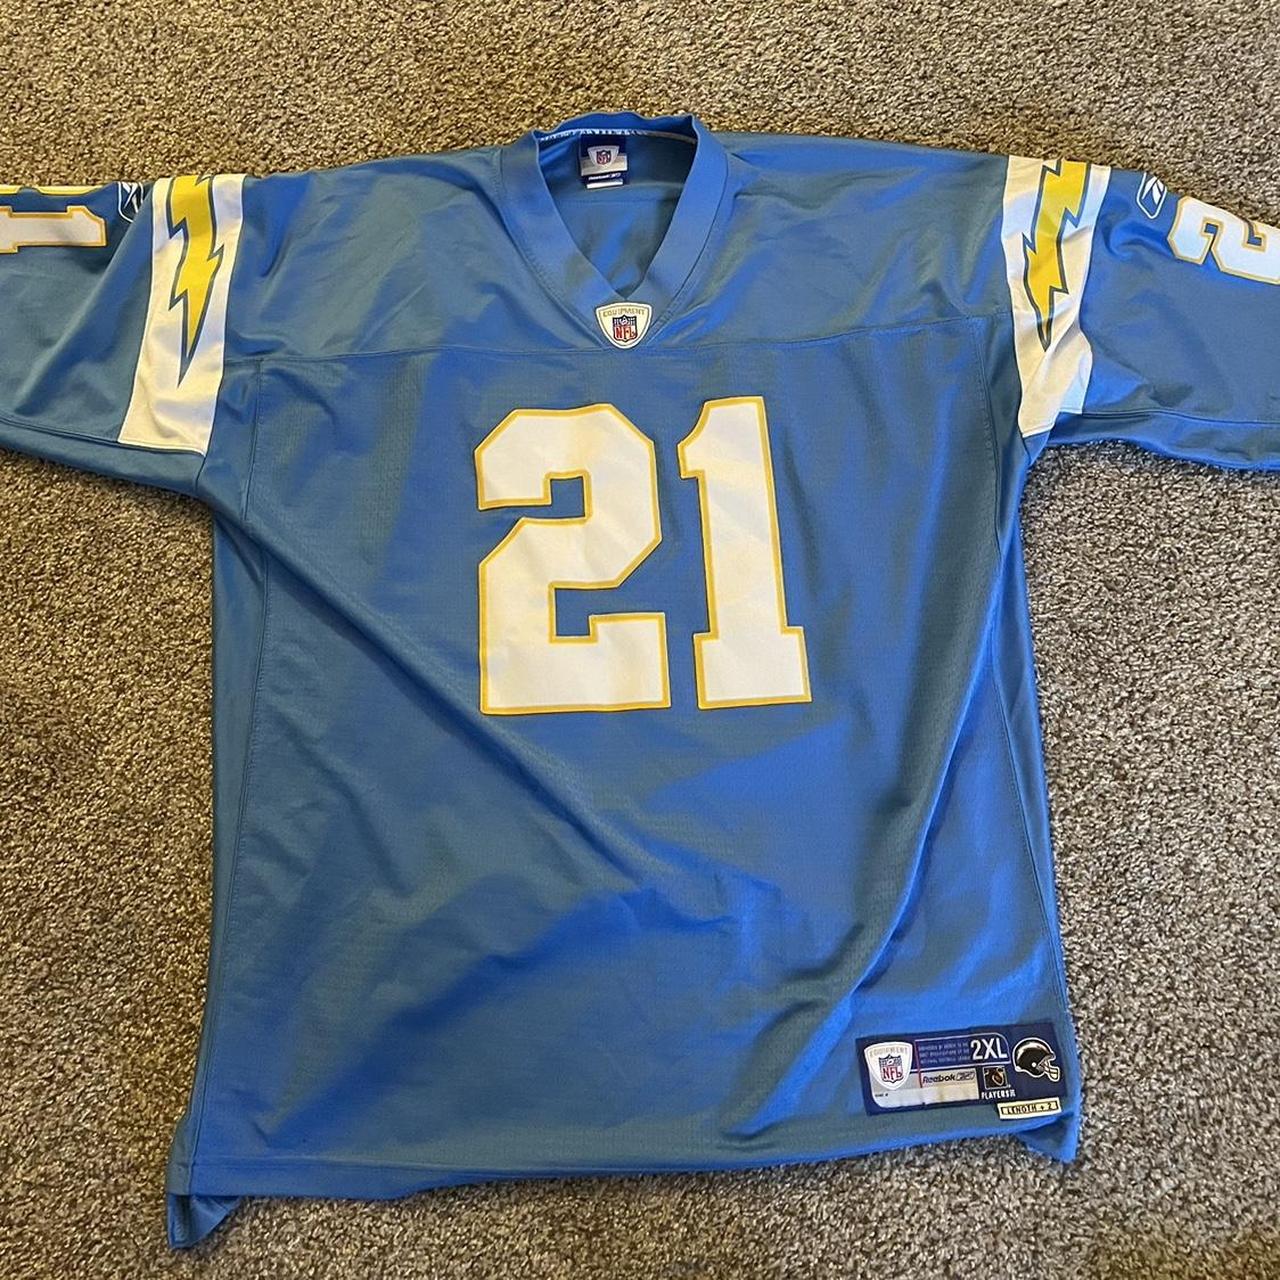 LT jersey baby blue chargers size 2xl #chargers - Depop